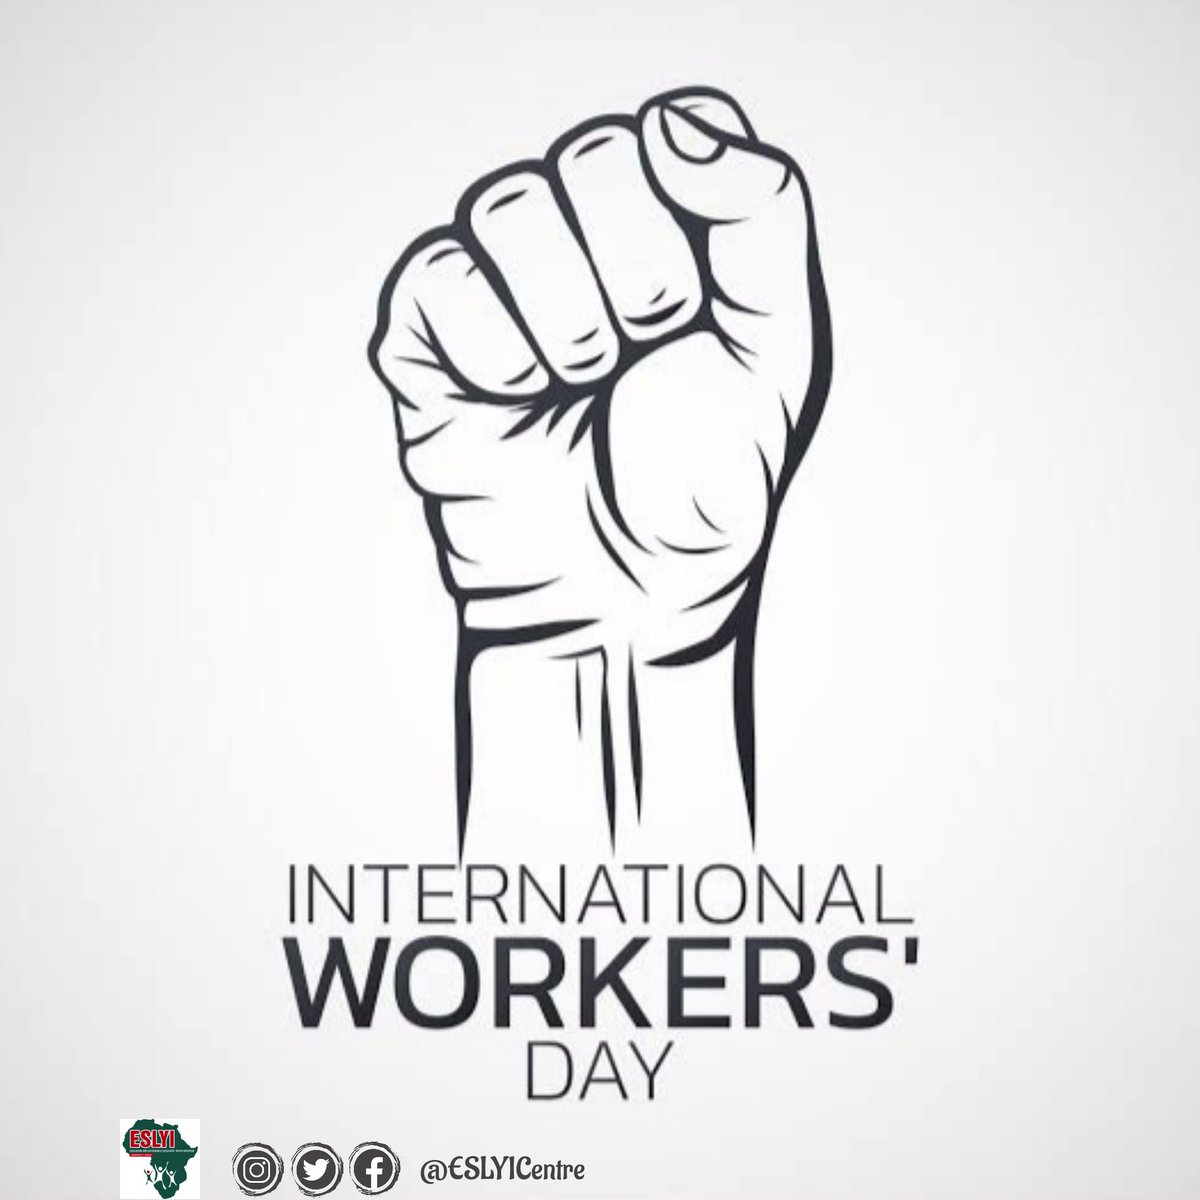 Economic fallout from #COVID19 shows that every worker is valuable
Parents can testify d true value of  schoolteachers
Healthworkers risk their lives by being at the forefront of the fight
Securityworkers do all to maintain social order
Every worker is a #HERO
Happy  #WorkersDay